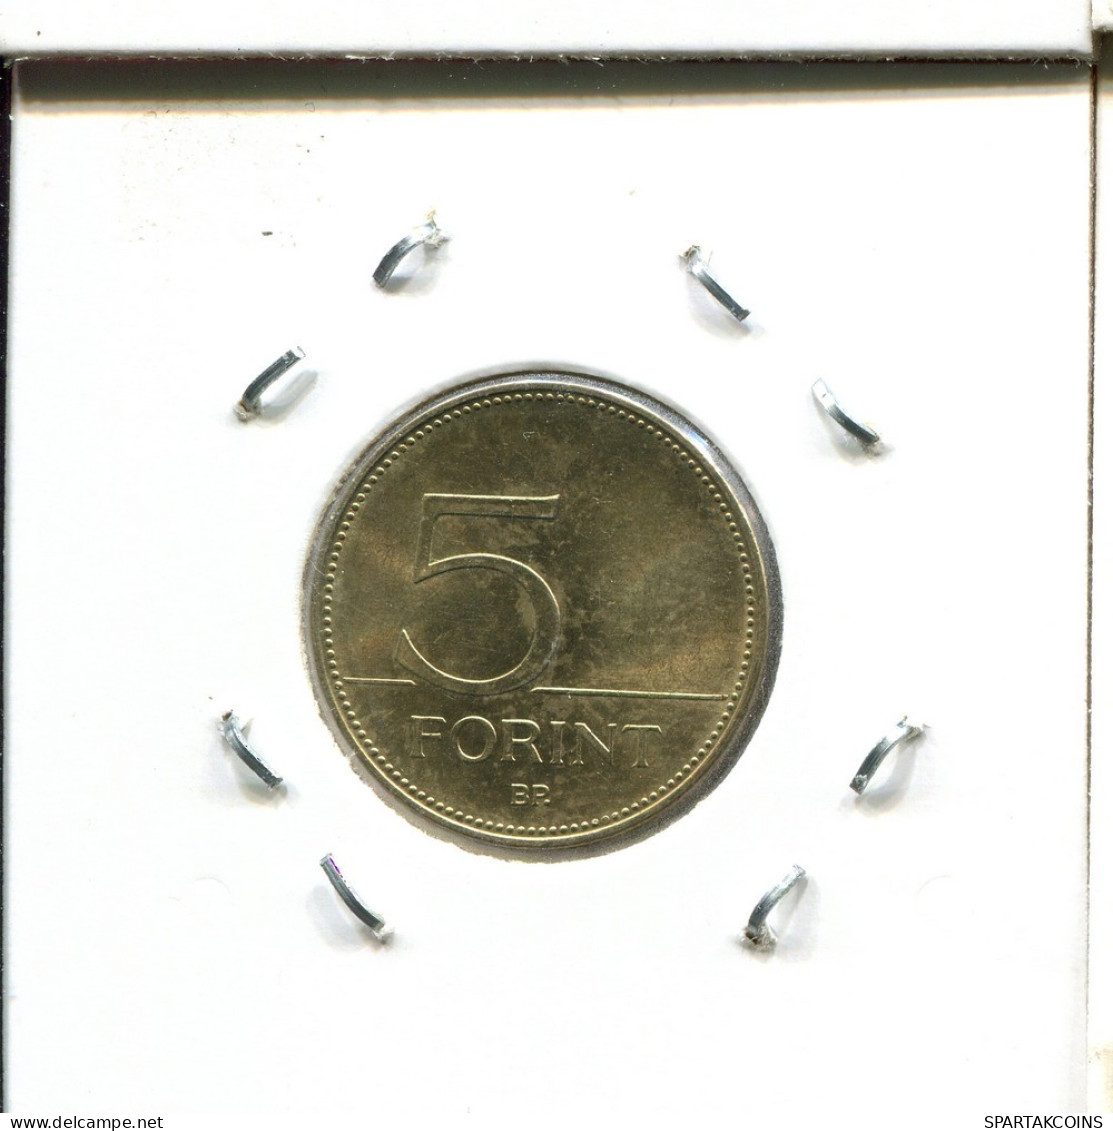 5 FORINT 2006 HUNGARY Coin #AS514.U.A - Ungheria